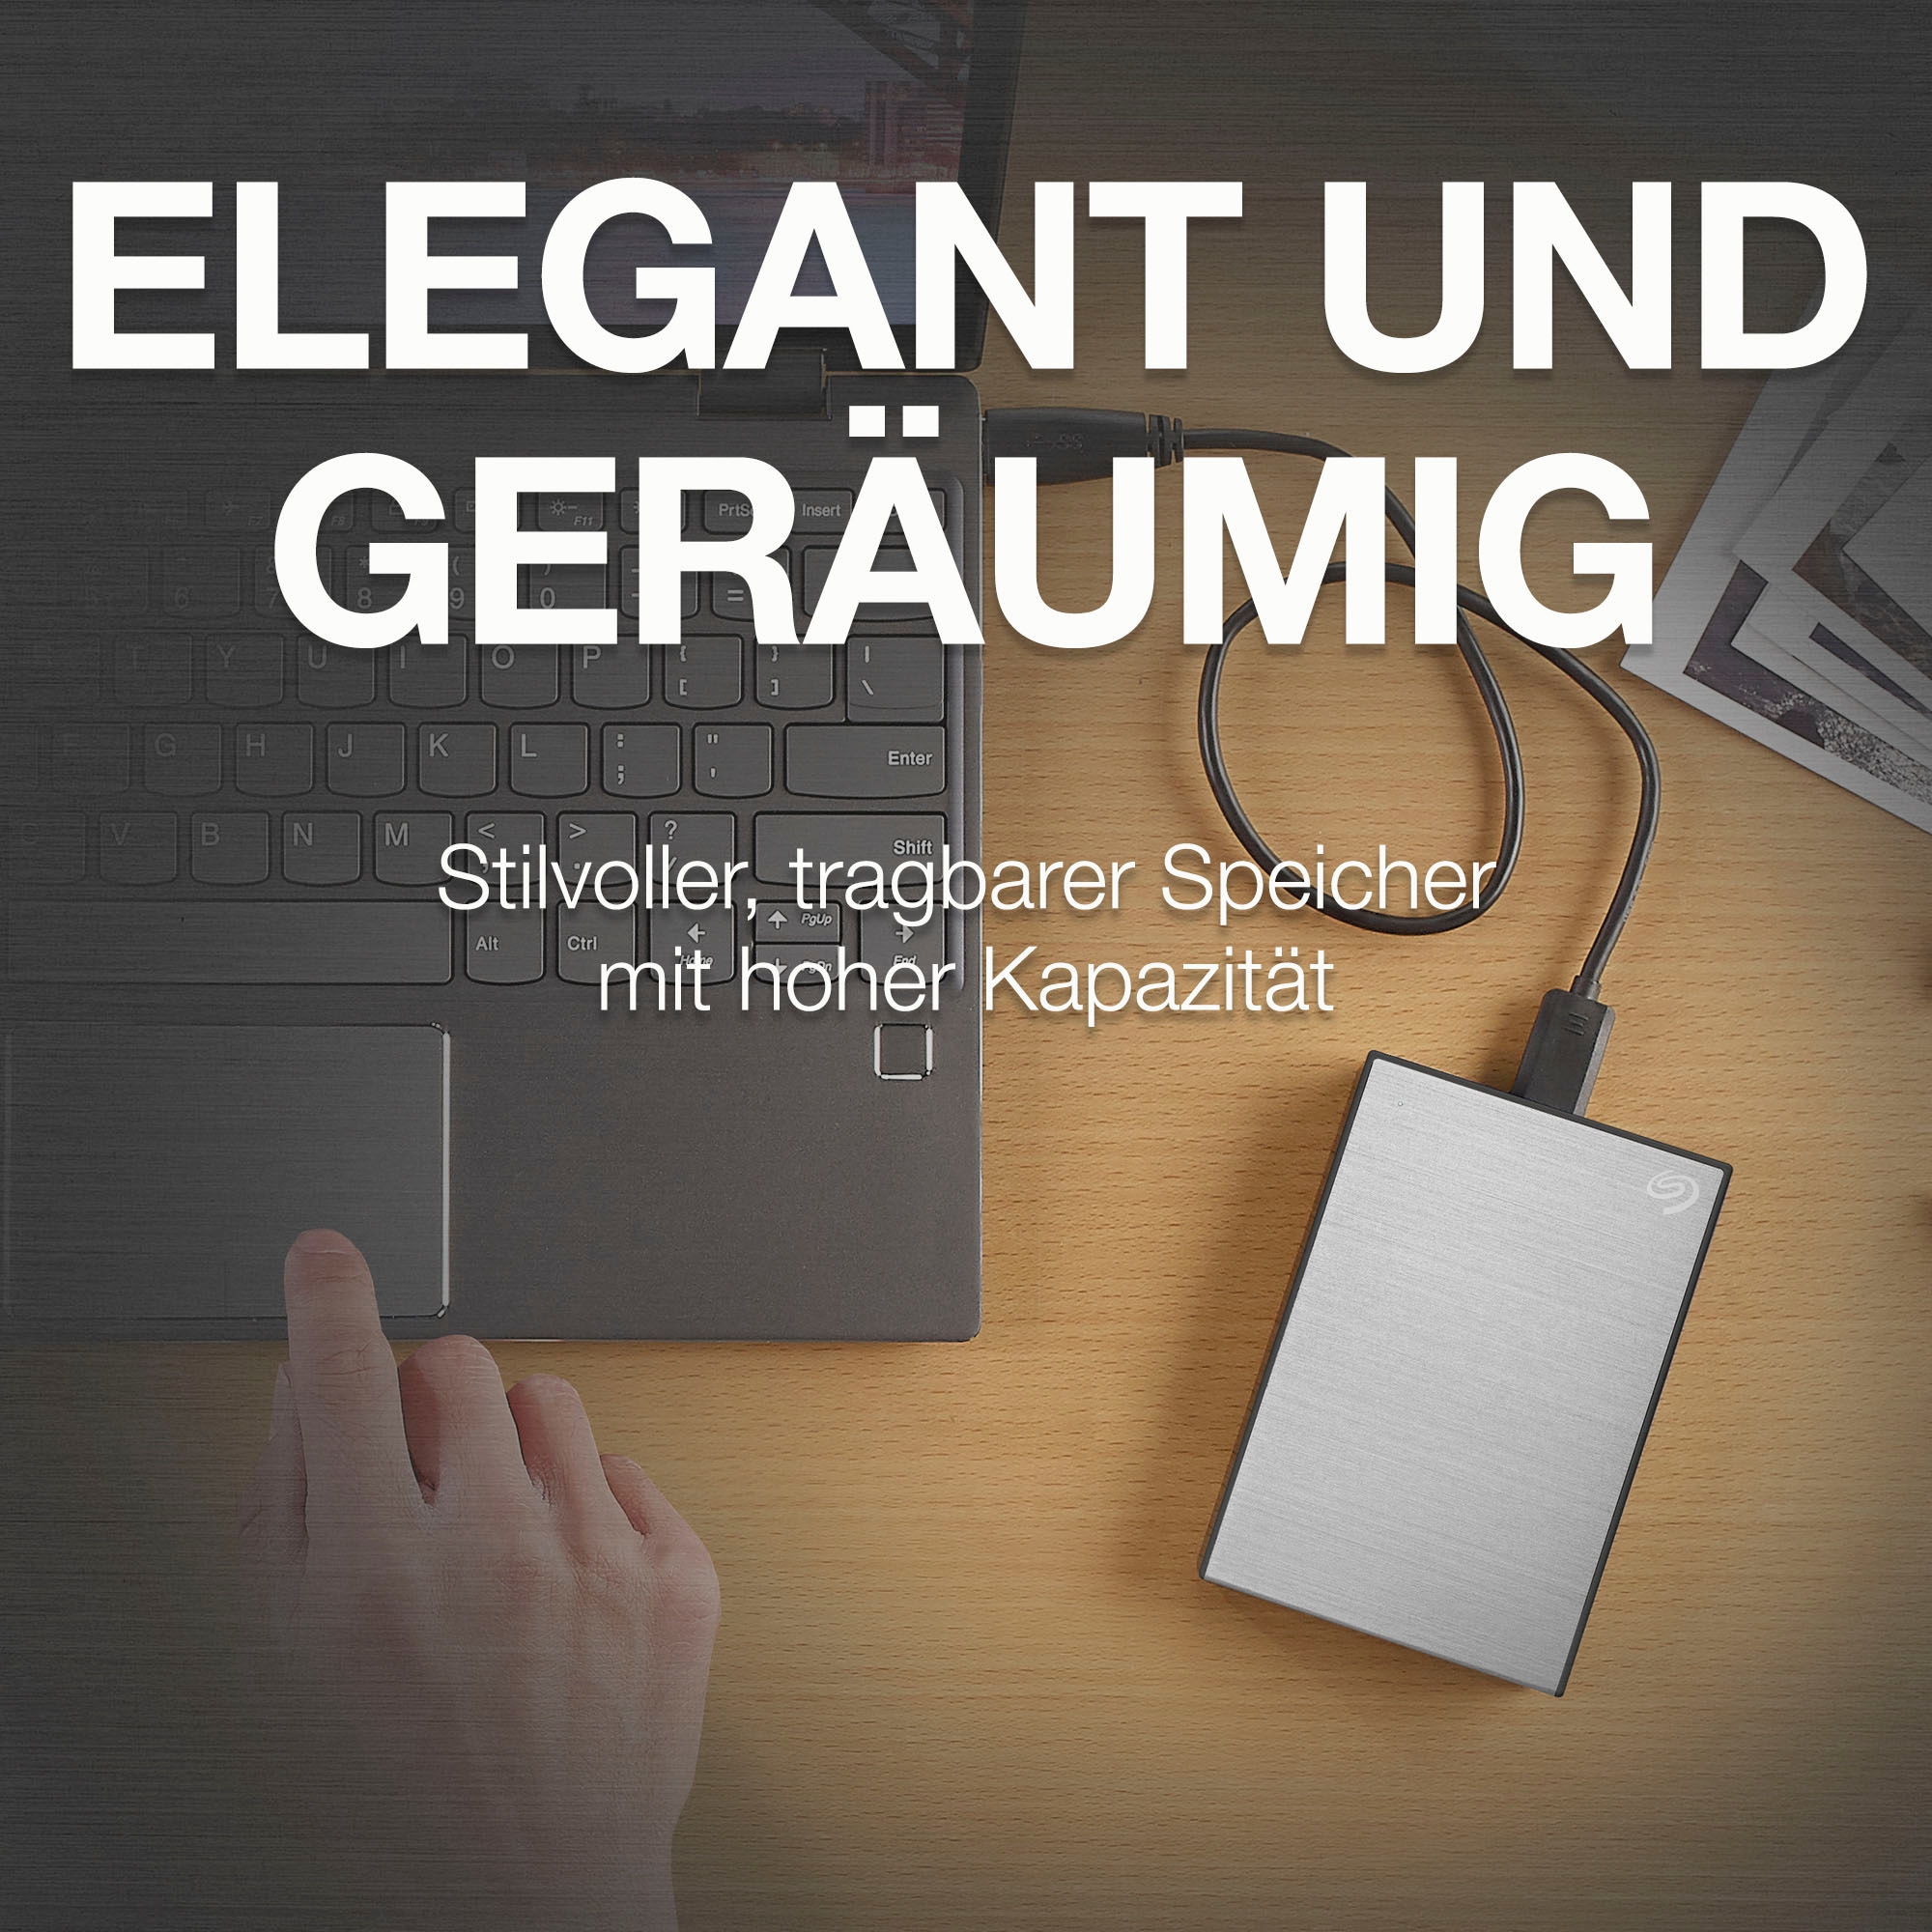 Seagate Drive »One 1TB«, UNIVERSAL Garantie Recovery 3 Jahre Data Zoll, 2 Rescue USB Anschluss Portable Services | Inklusive 2,5 ➥ Jahre 3.2, HDD-Festplatte XXL Touch externe